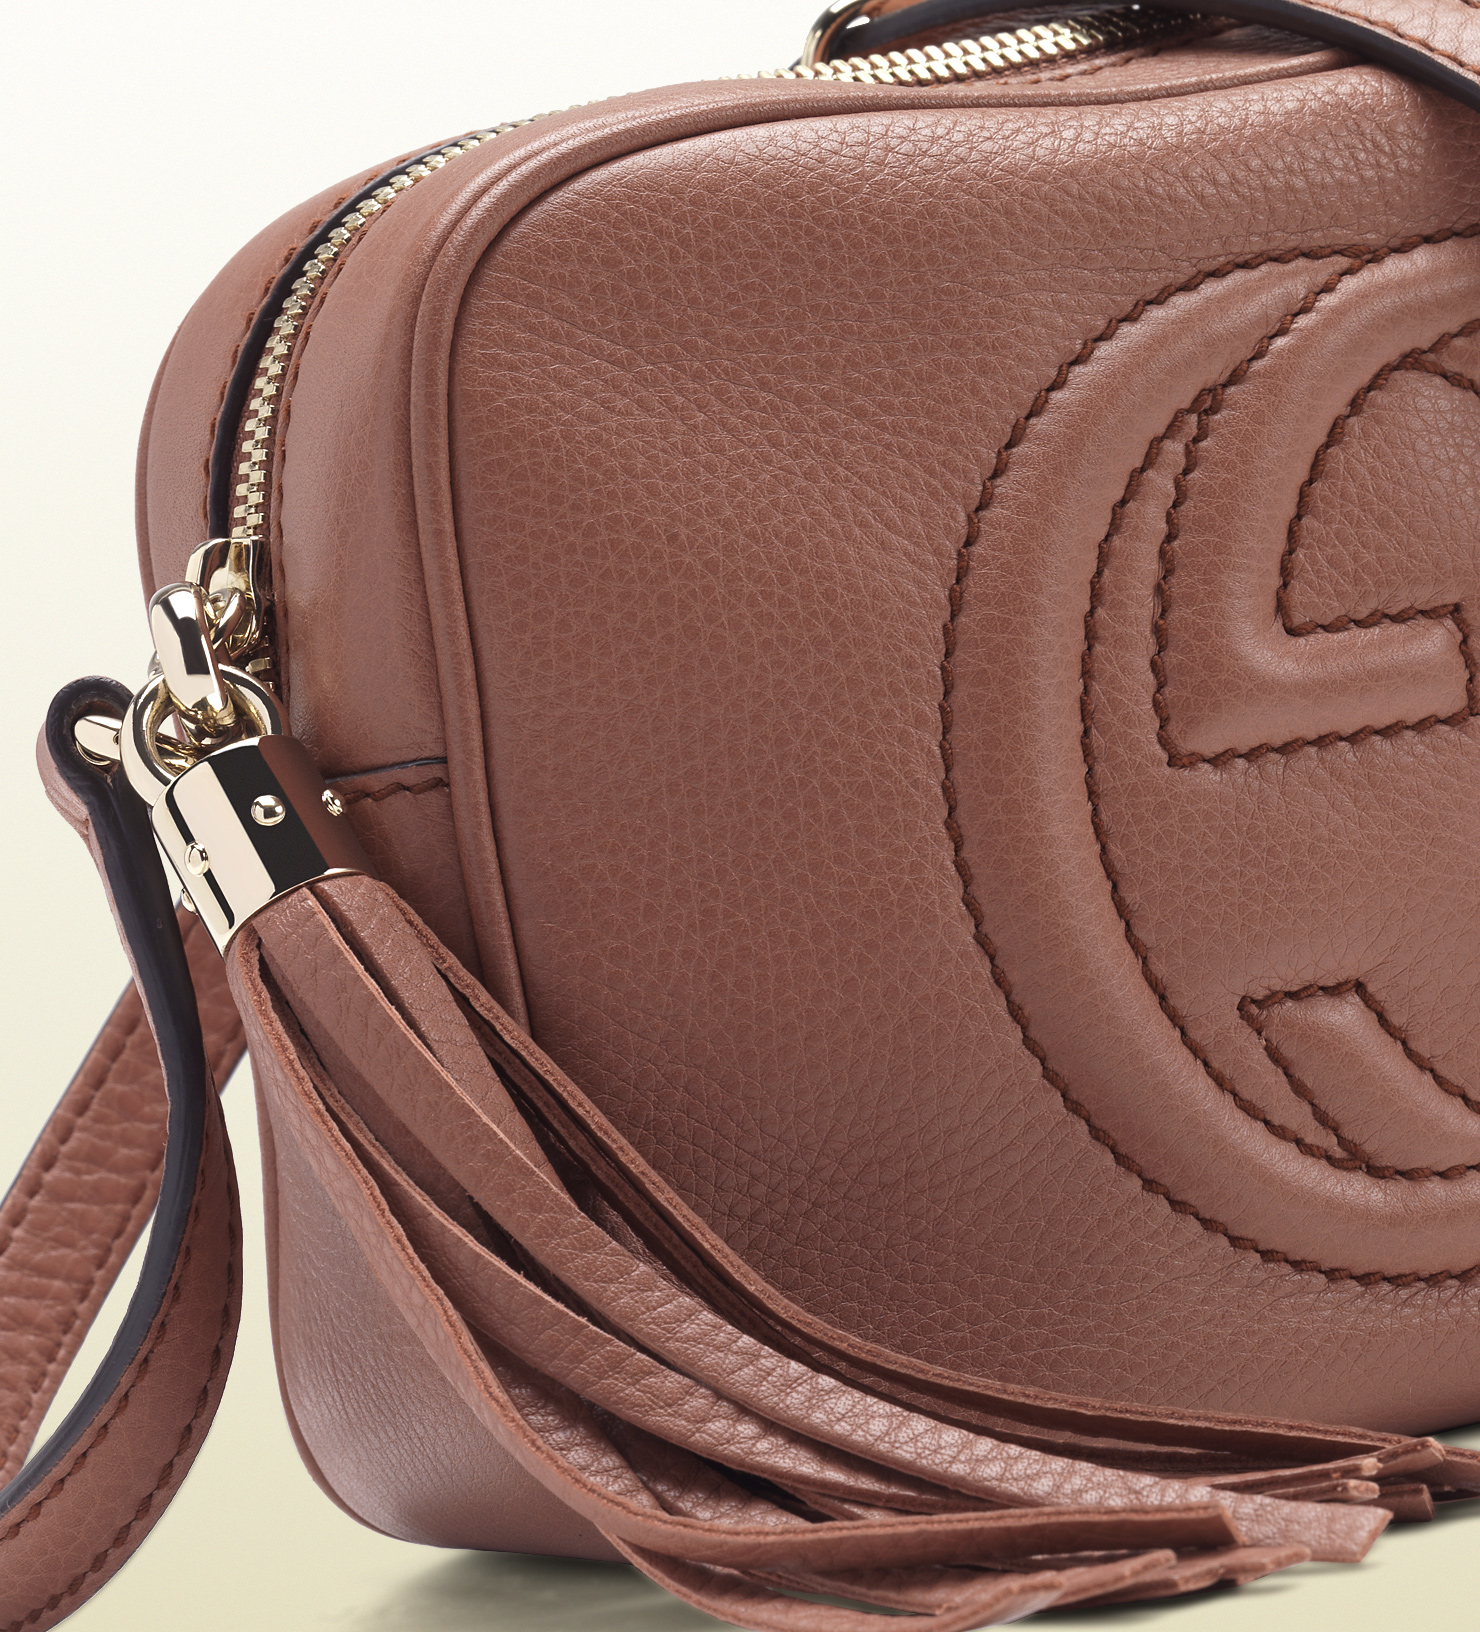 Gucci Soho Pink Disco Bag in Brown - Lyst